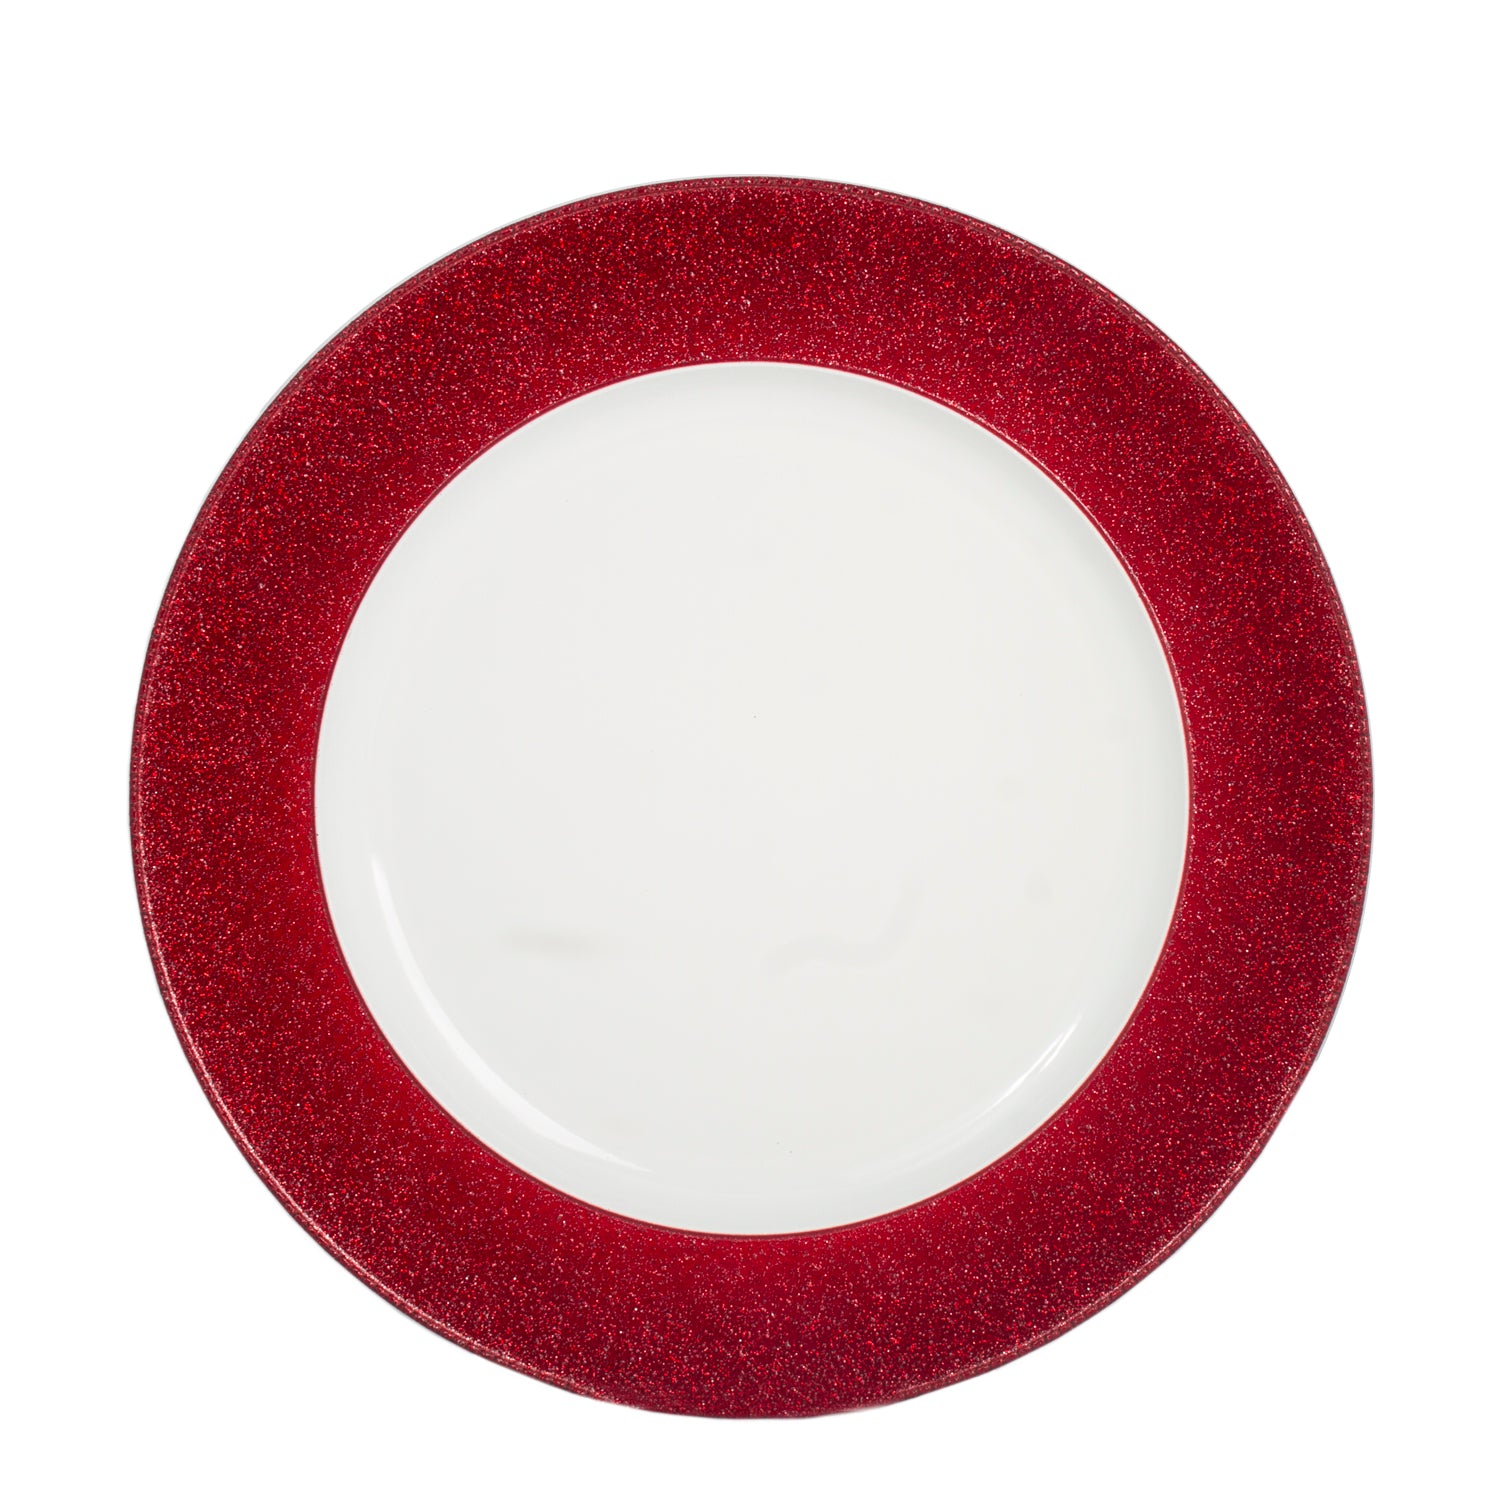 Aramco - Charger Plate white w/ Red Ring - (AI19967) - Main